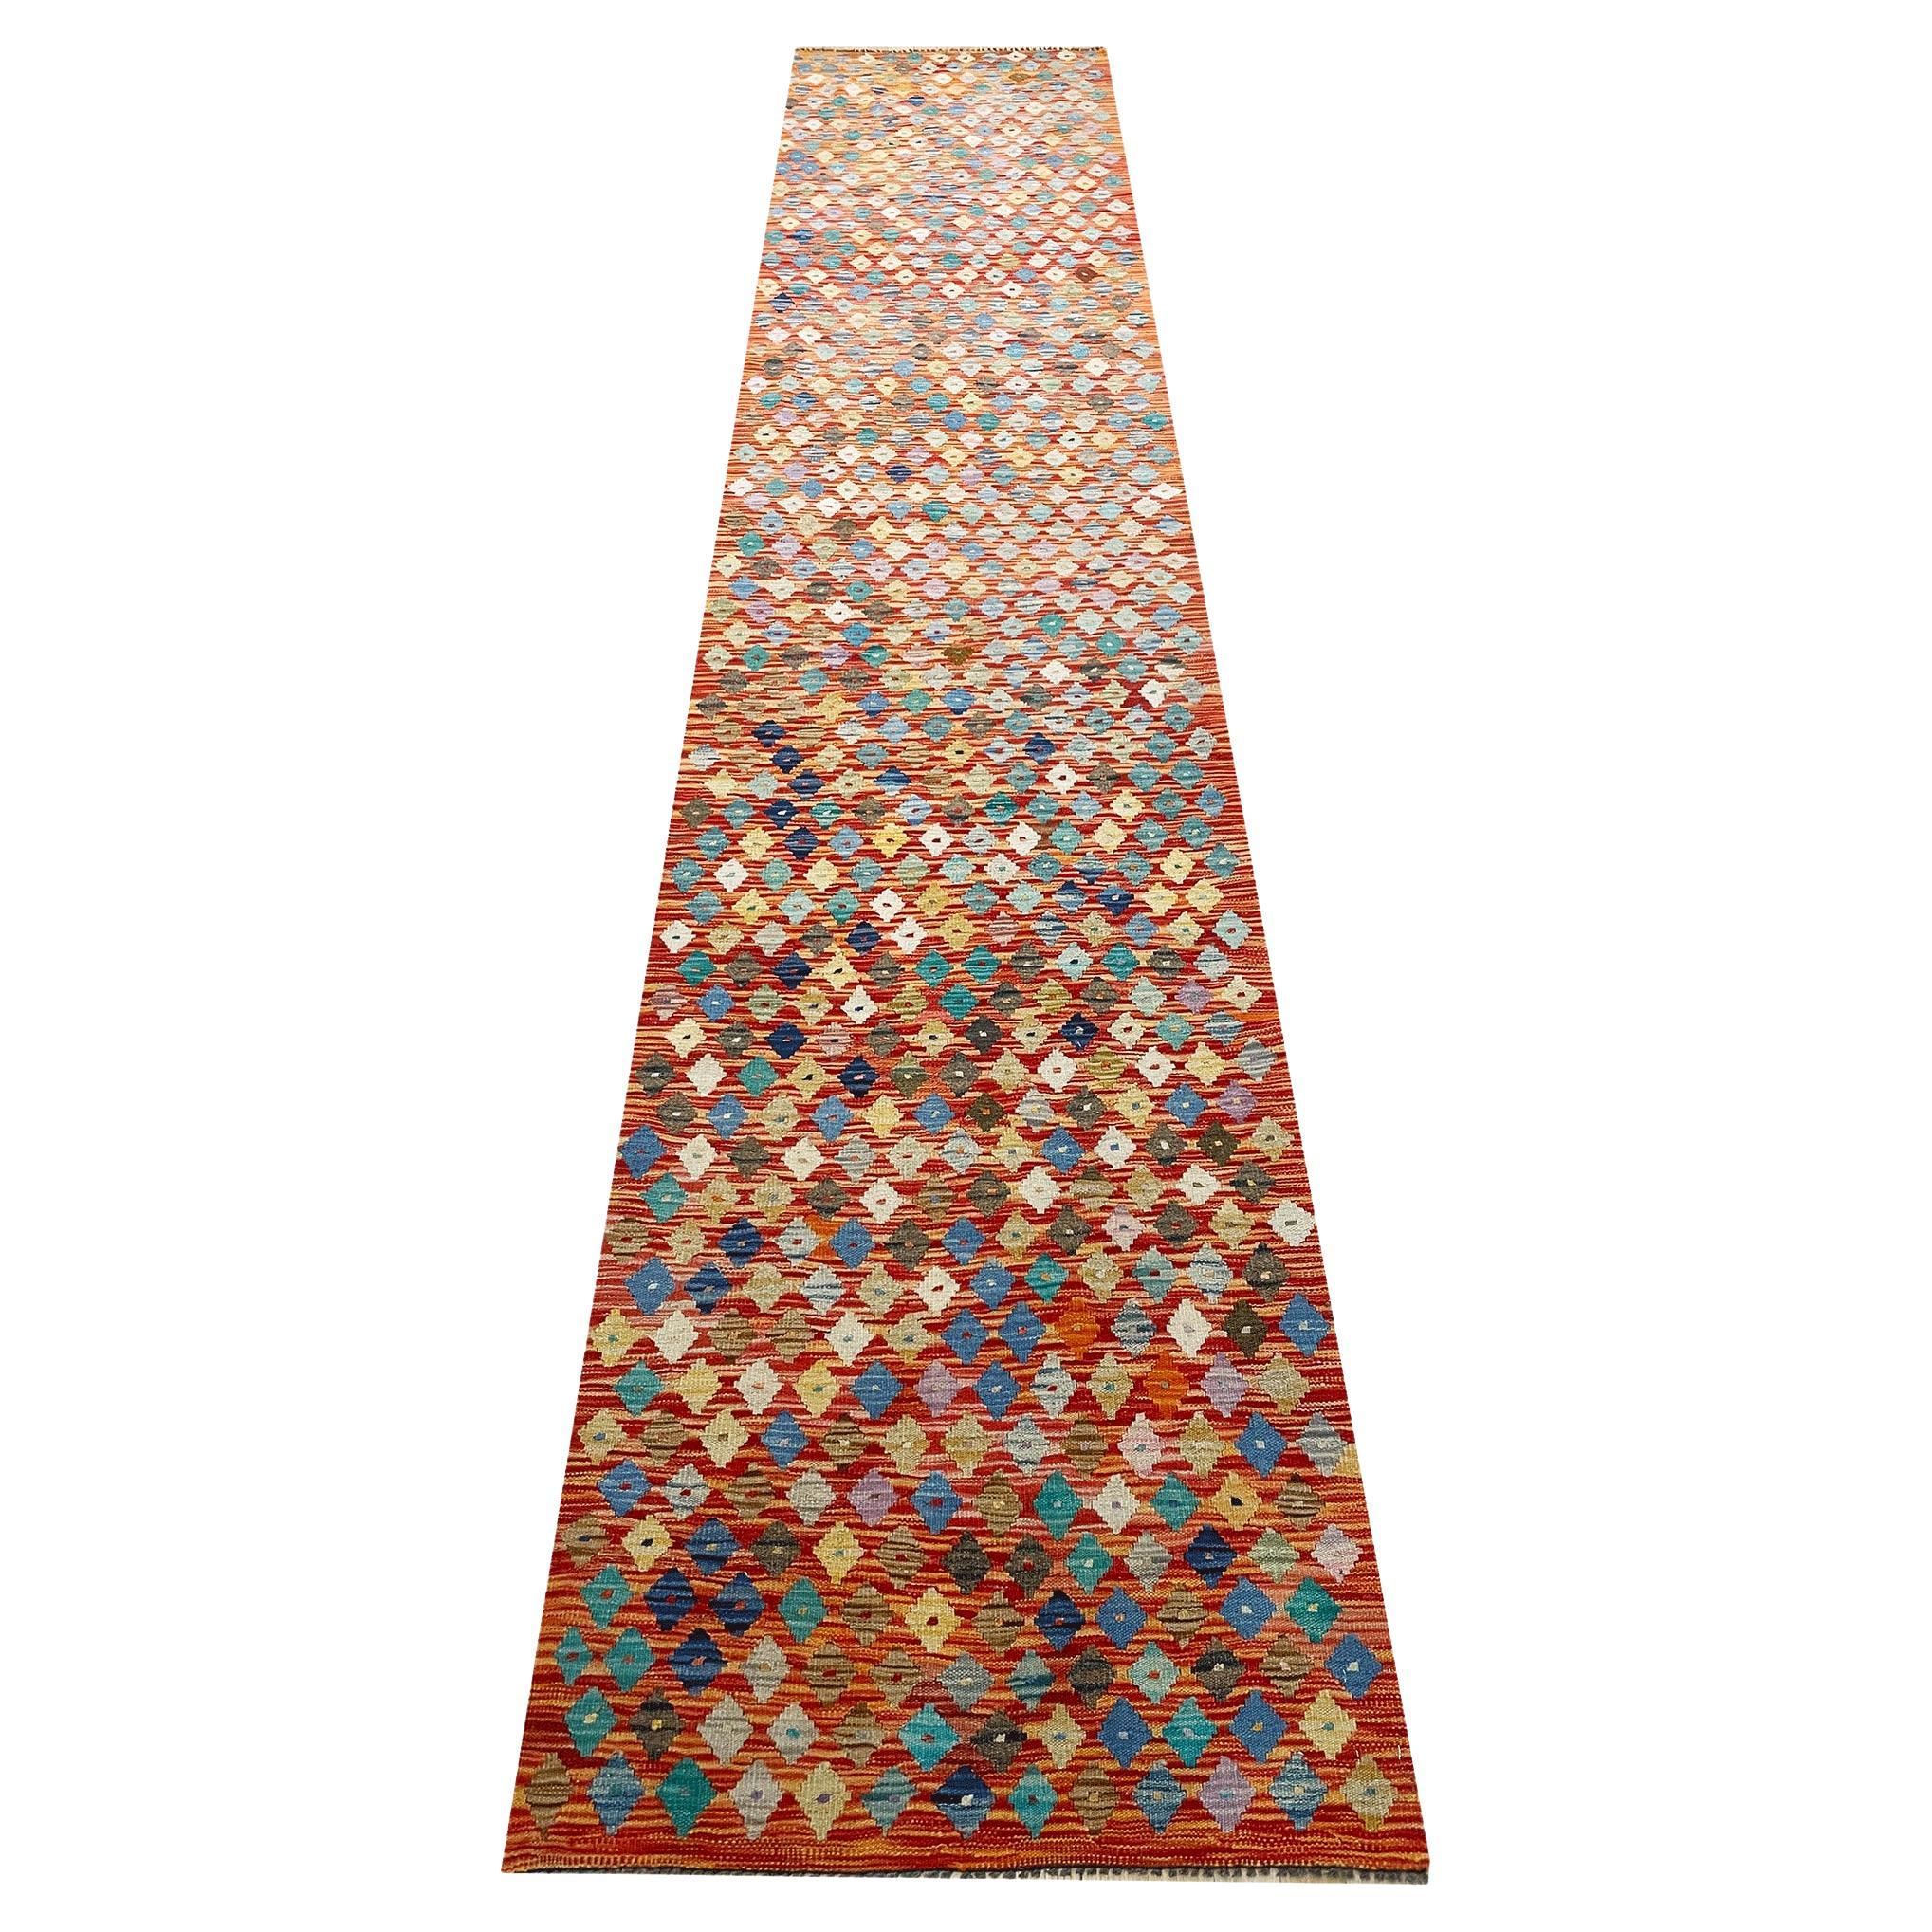 All Wool Colorful Kilim Runner 2′ 8″ x 12′ 9″ For Sale